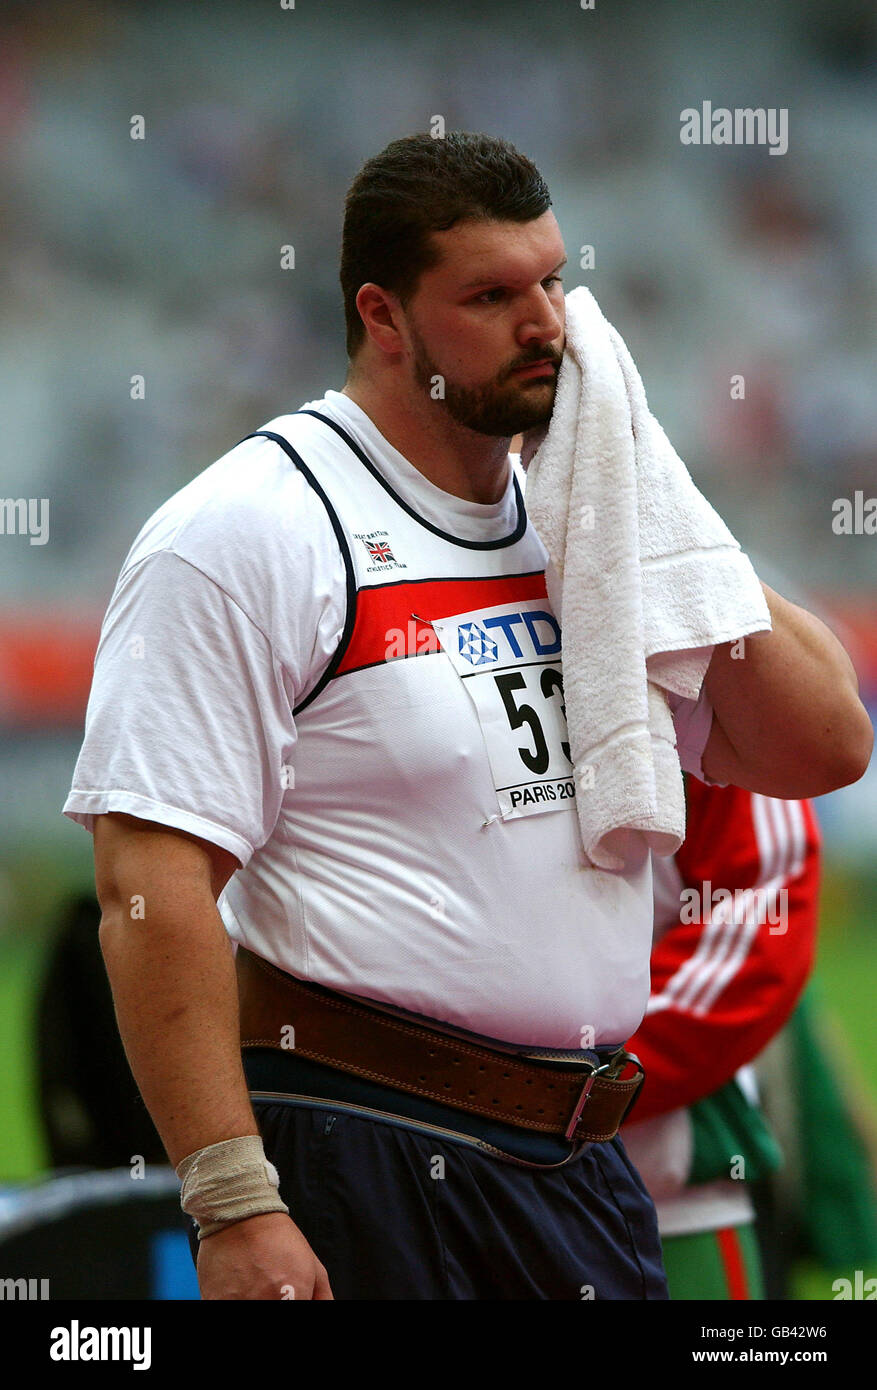 Athletics - IAAF World Athletics Championships - Paris 2003 - Men's Shot Put Qualifying. Great Britain's Carl Myerscough is dejected after going out of the Shot Put Stock Photo